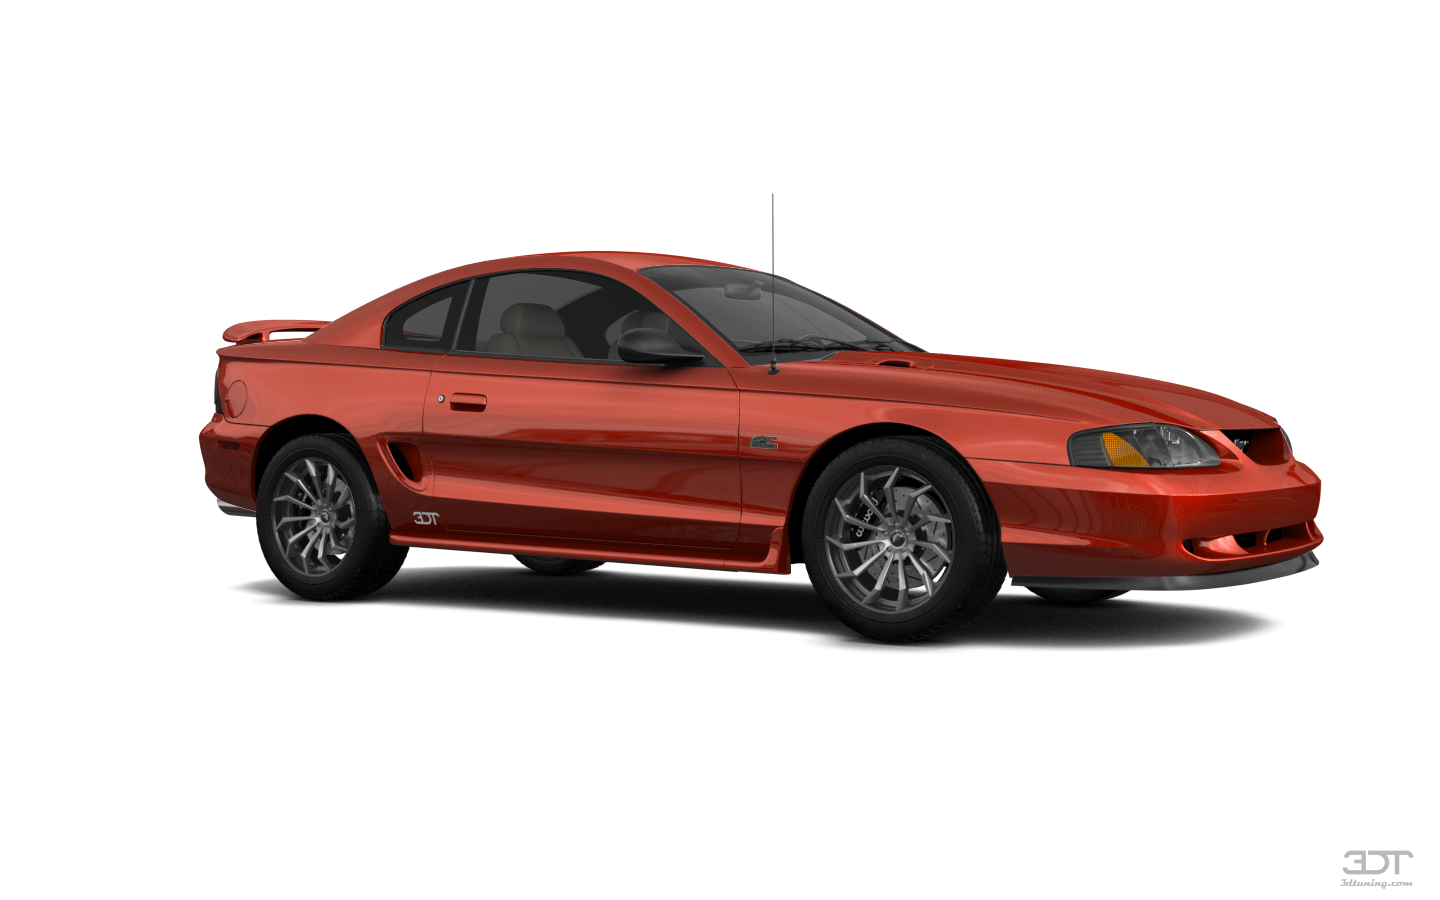 Ford Mustang 2 Door Coupe 1994